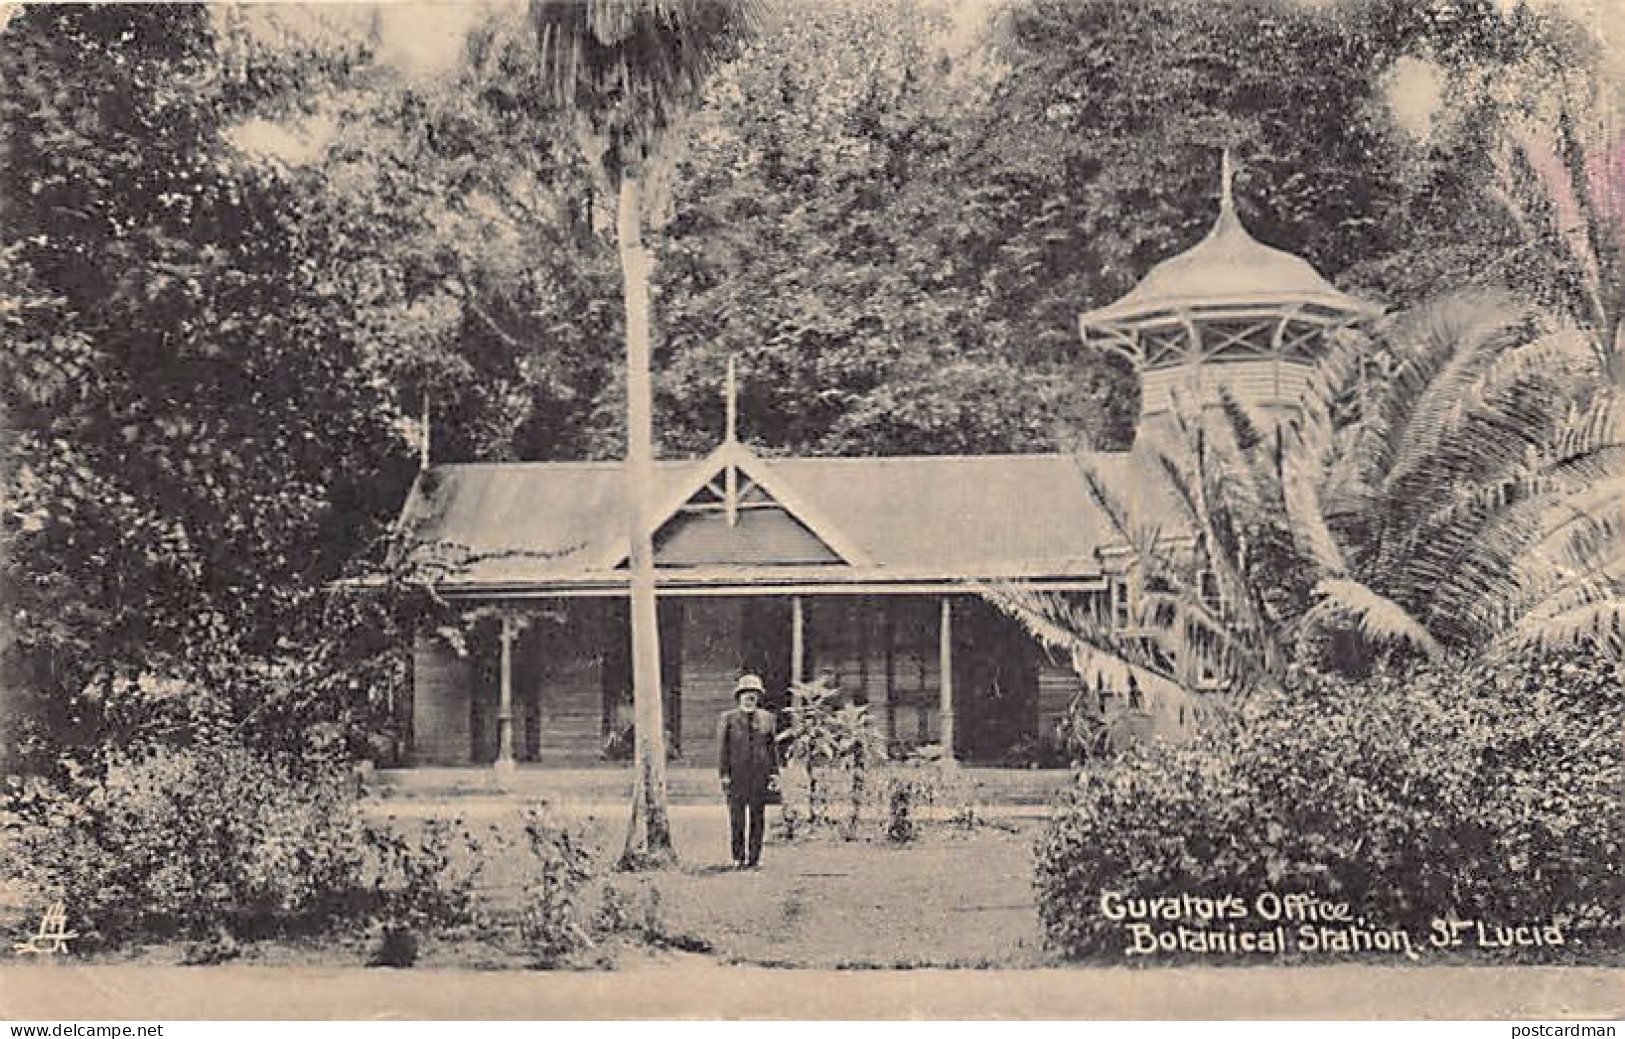 Saint Lucia - CASTRIES - Curator's Office, Botanical Garden - THE POSTCARD IS LIGHTLY UNSTICKED - Publ. Clarke & Co.  - Saint Lucia